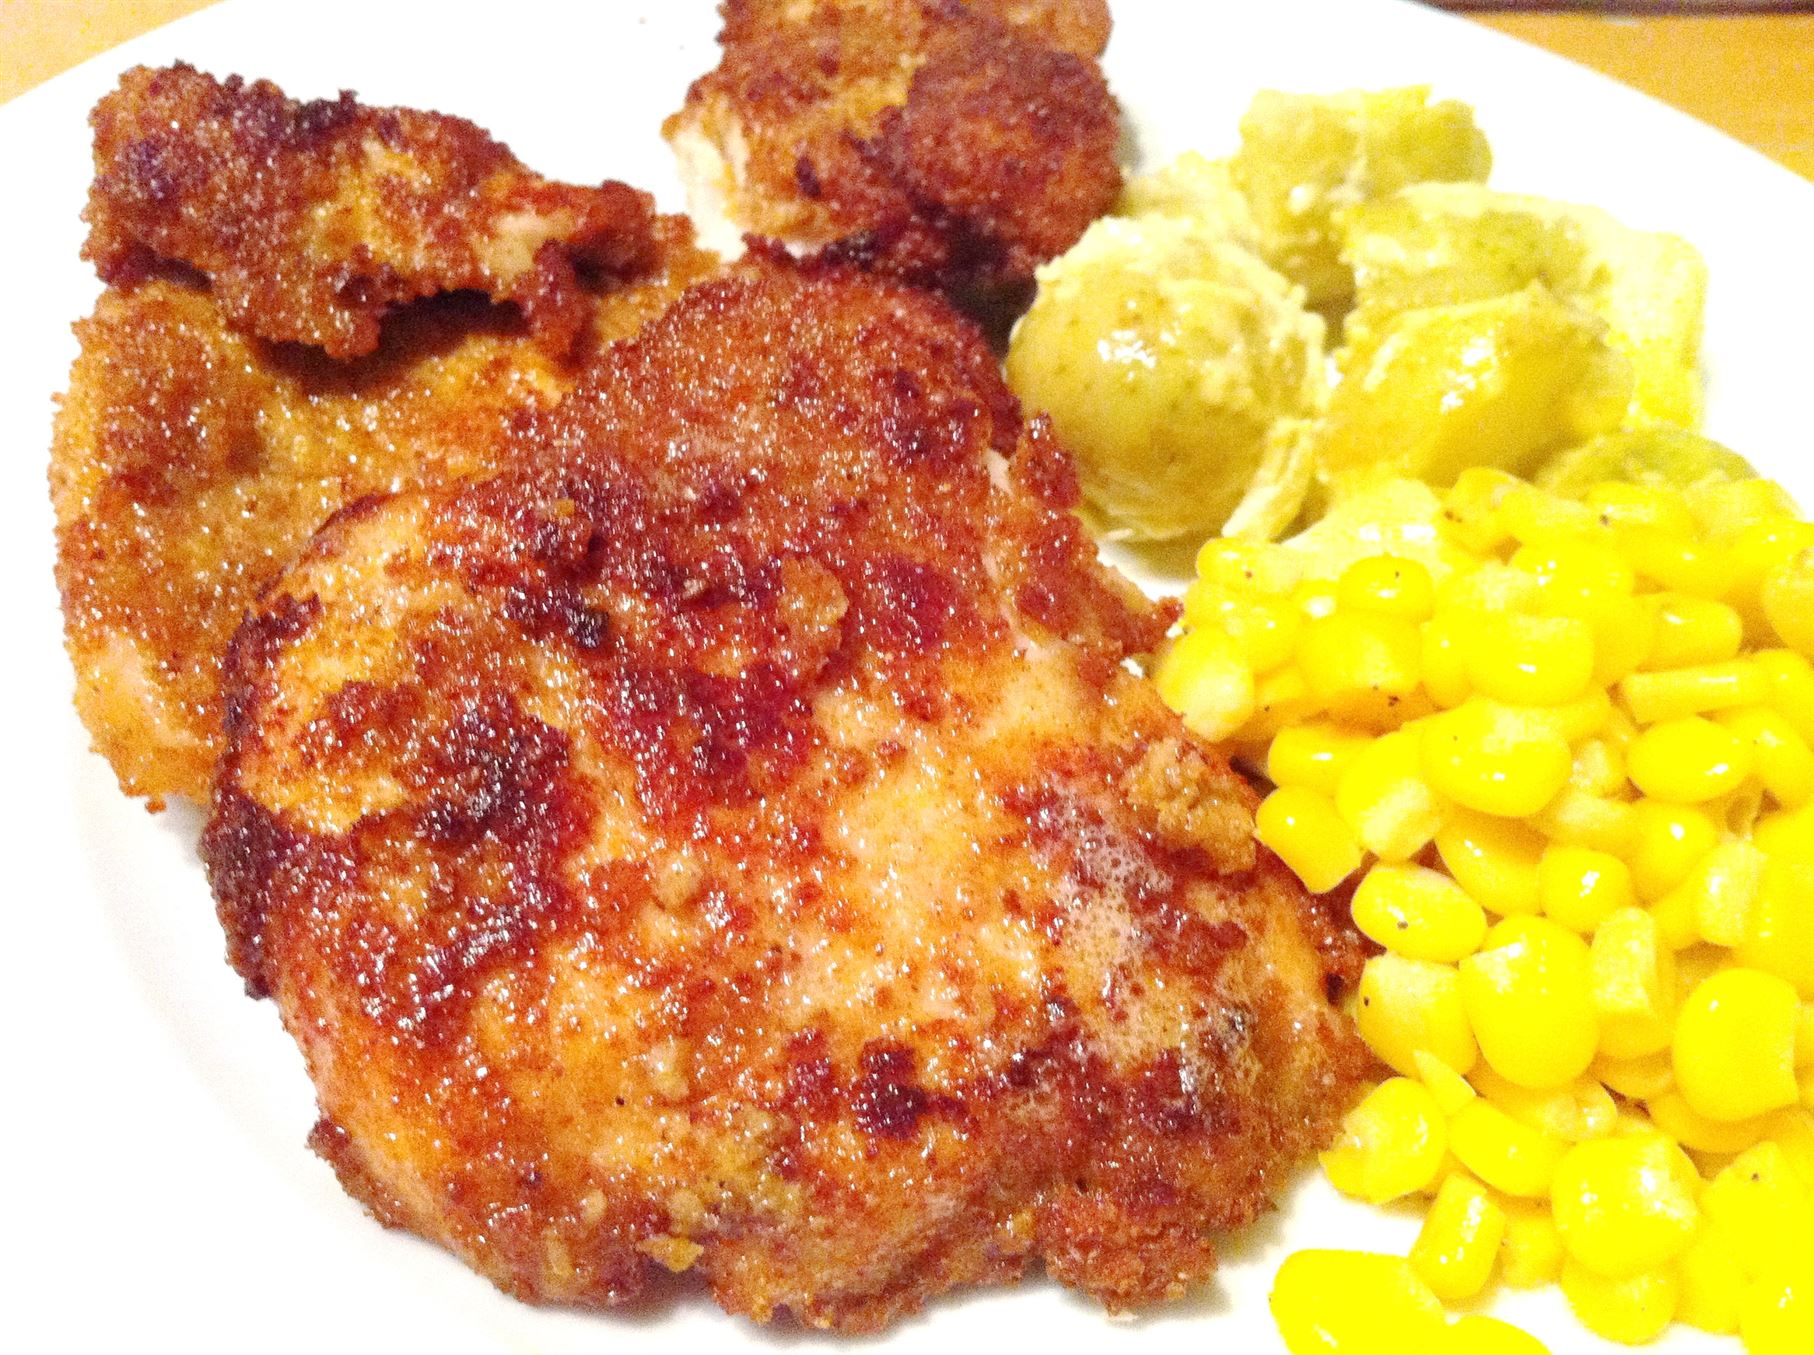 Spicy Crumbed Chicken Breast with Mustard-Mayo Potato Salad, Lay The Table